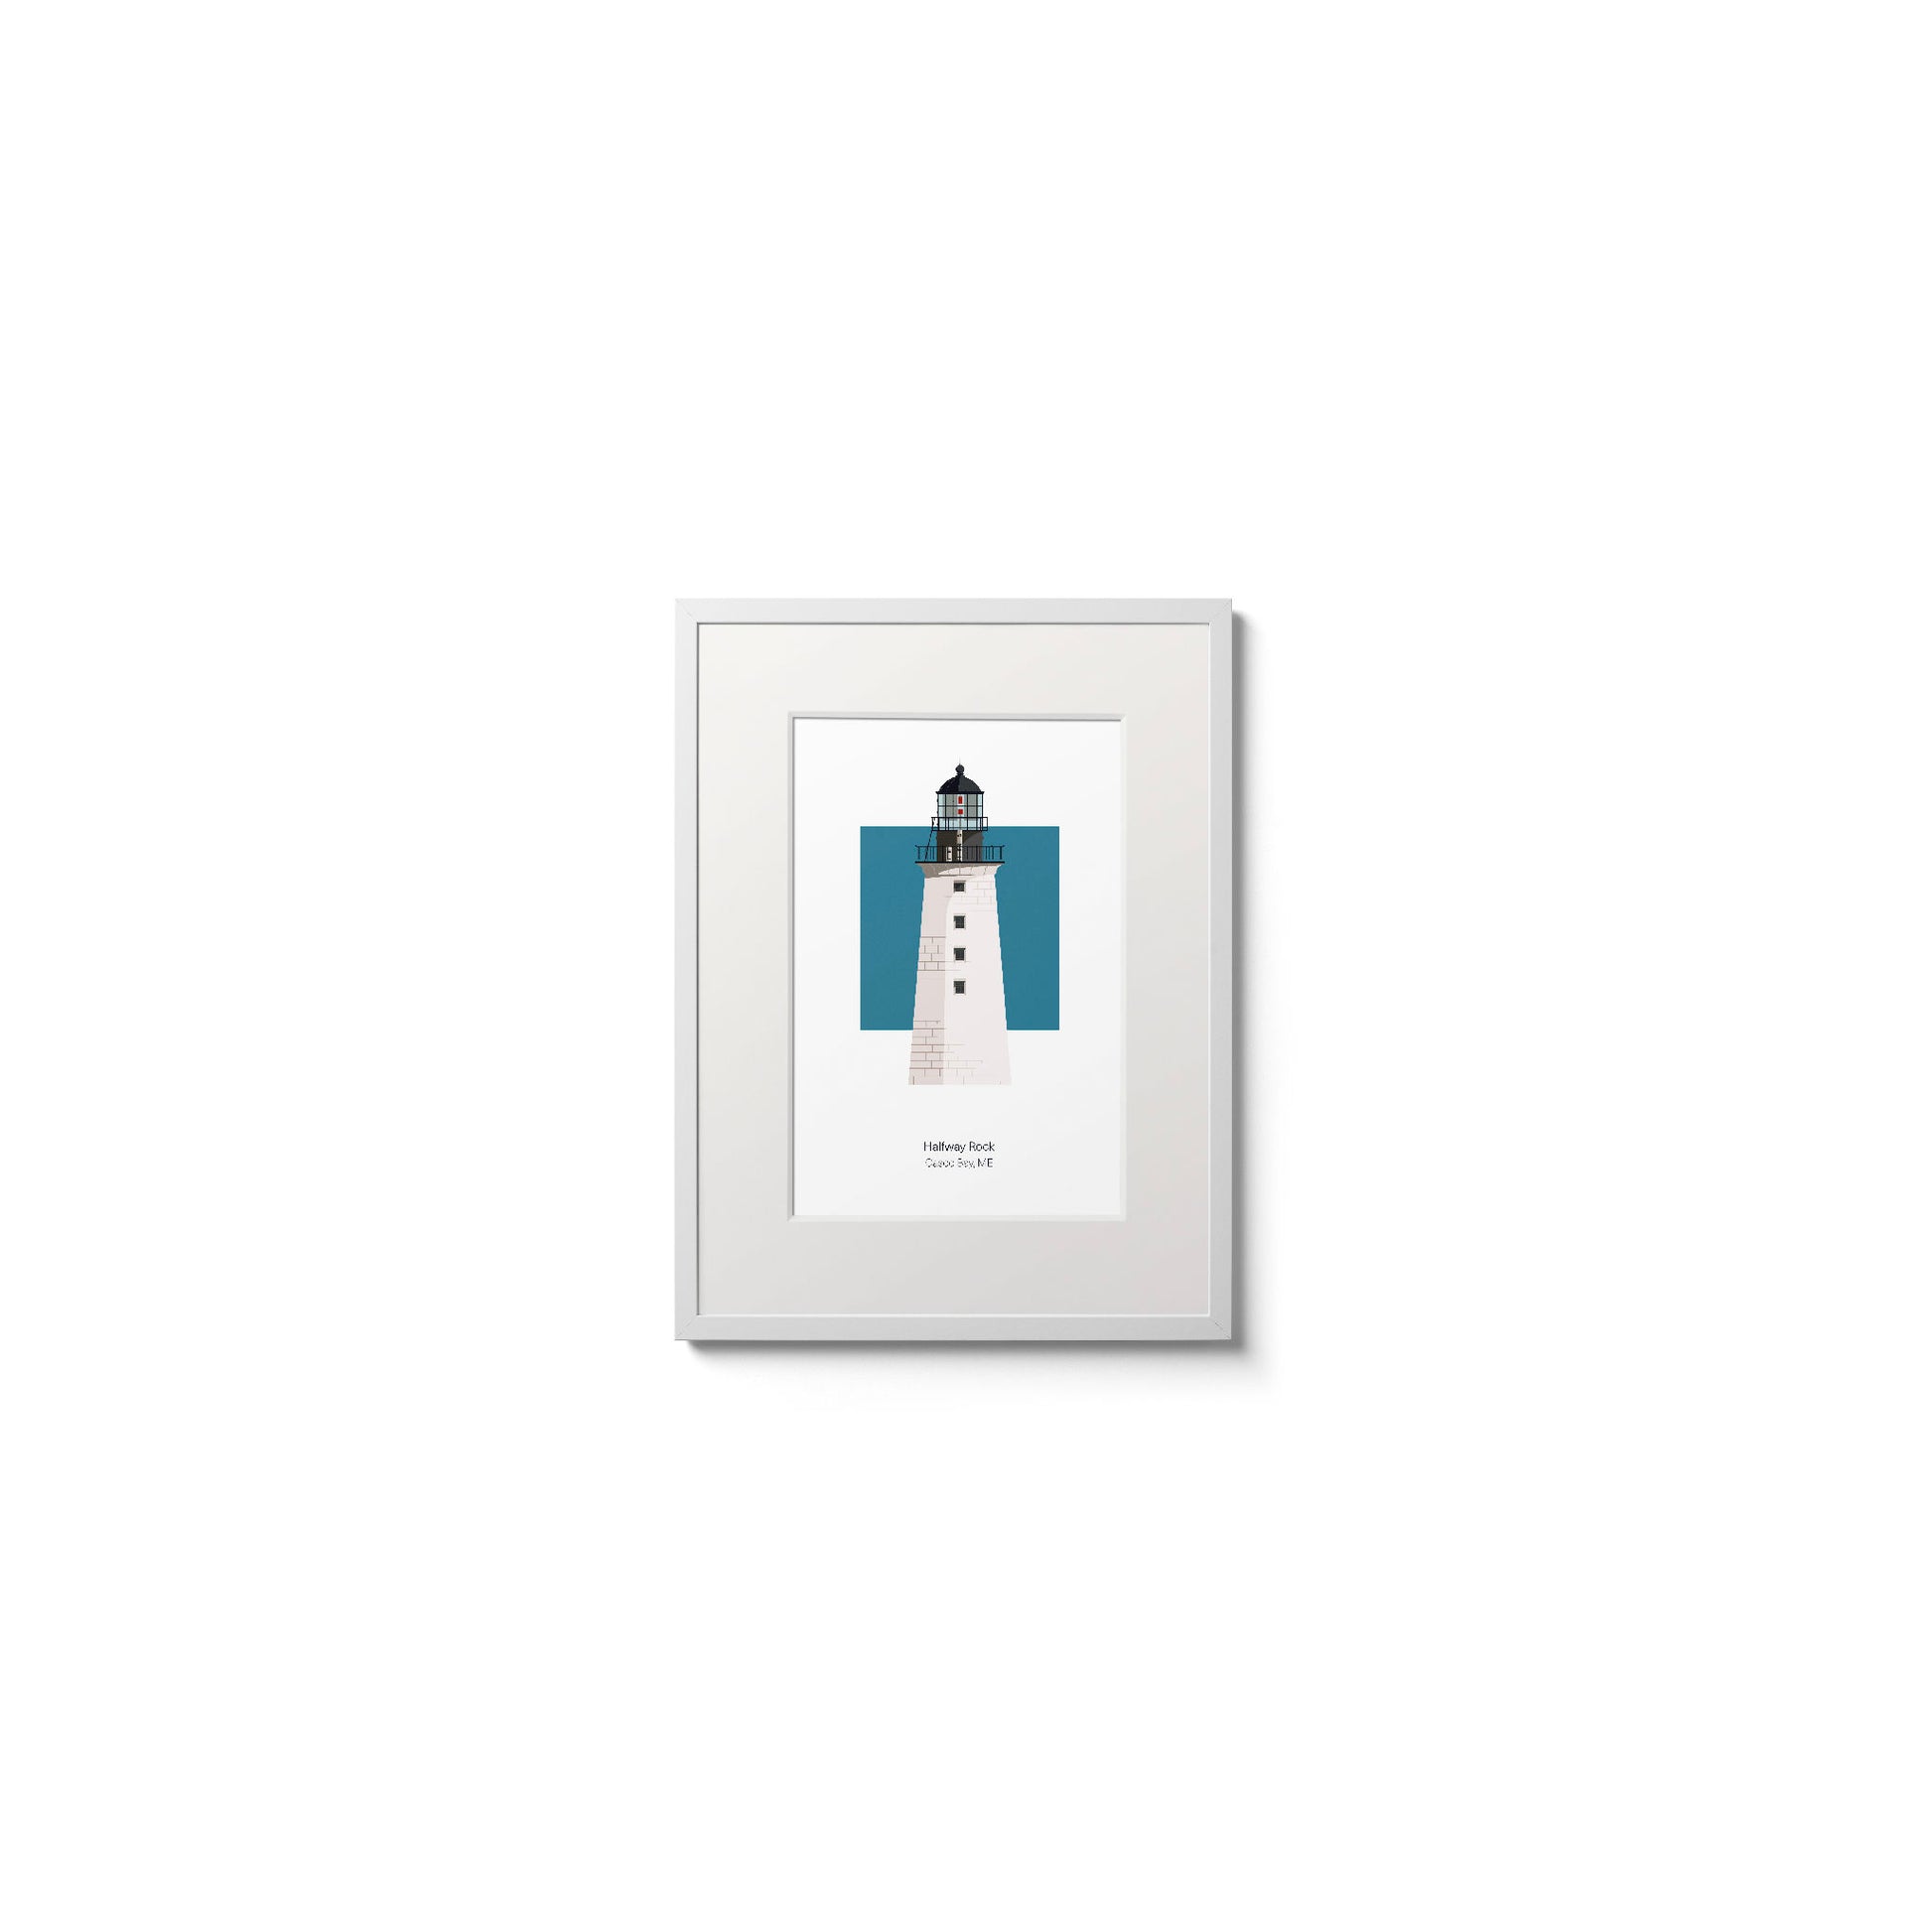 Illustration of the Halfway Rock lighthouse, ME, USA. On a white background with aqua blue square as a backdrop., in a white frame  and measuring 6"x8" (15x20cm).